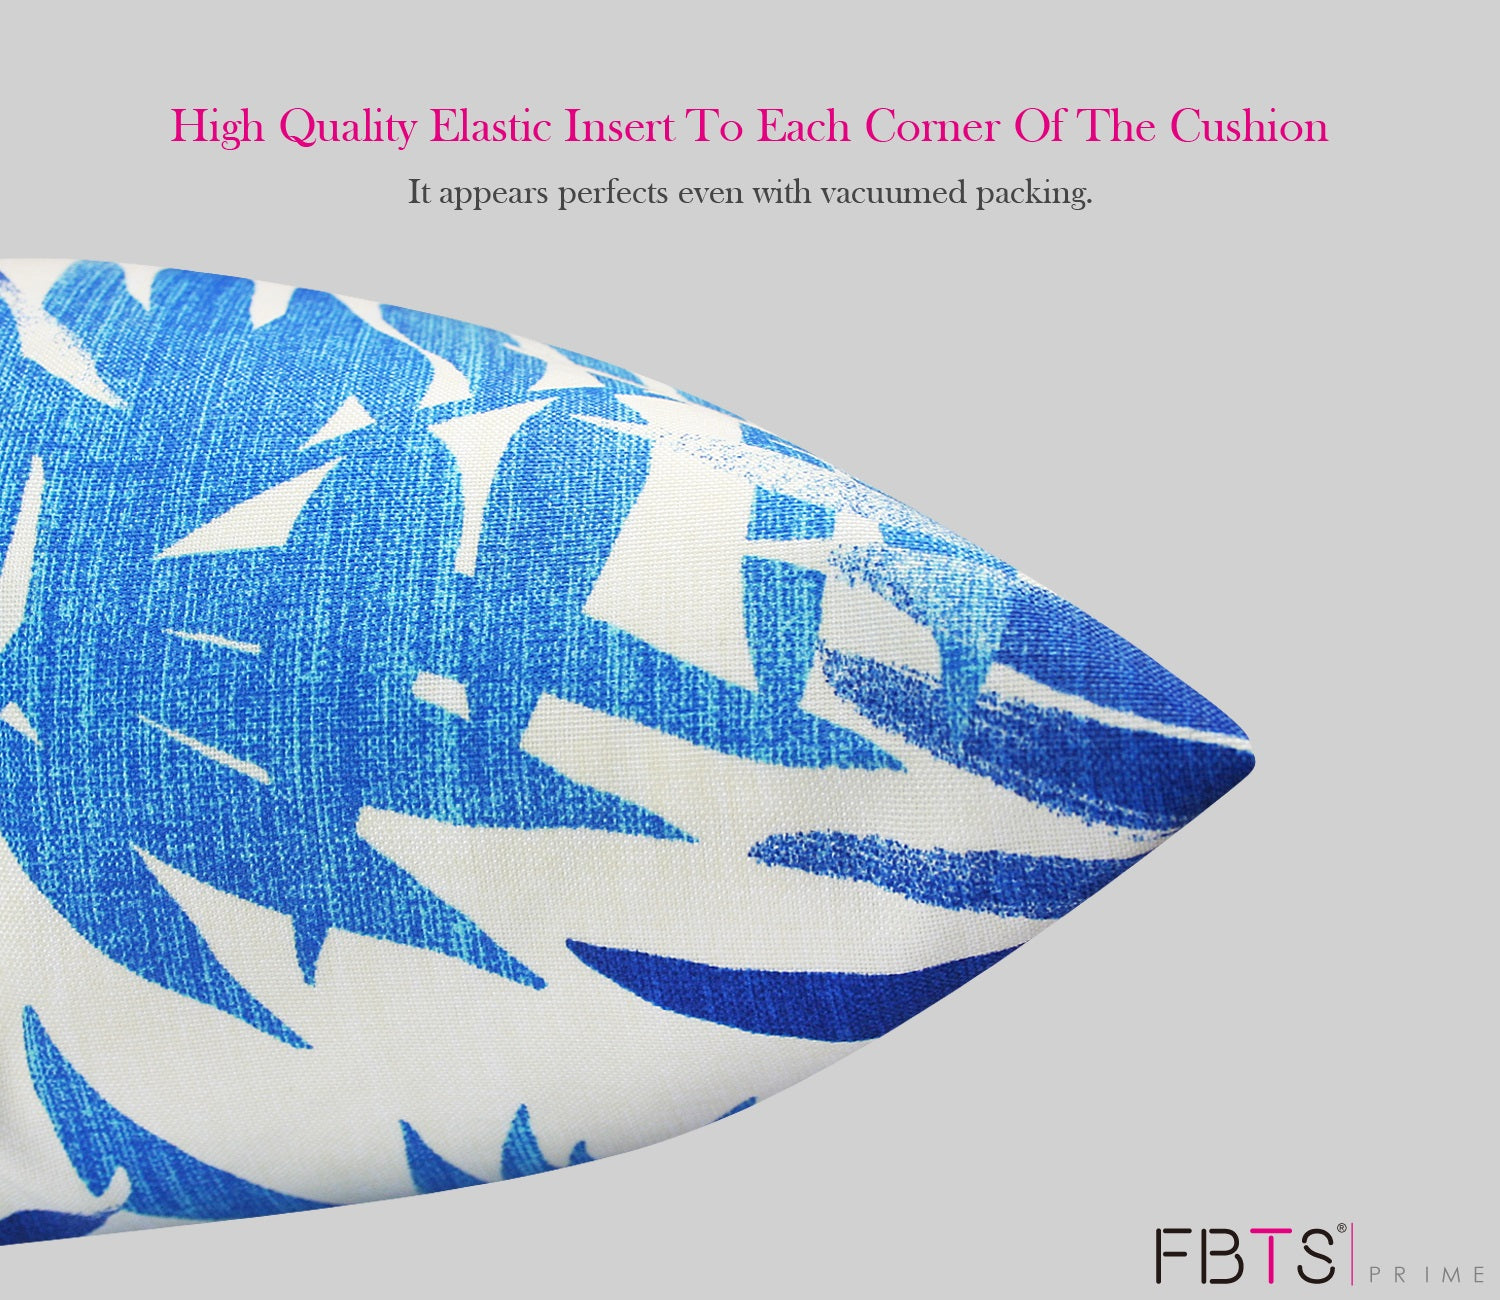 Outdoor Pillows with Insert Navy Leaves Patio Accent Throw Pillows 18x18 inch Square Decorative Pillows